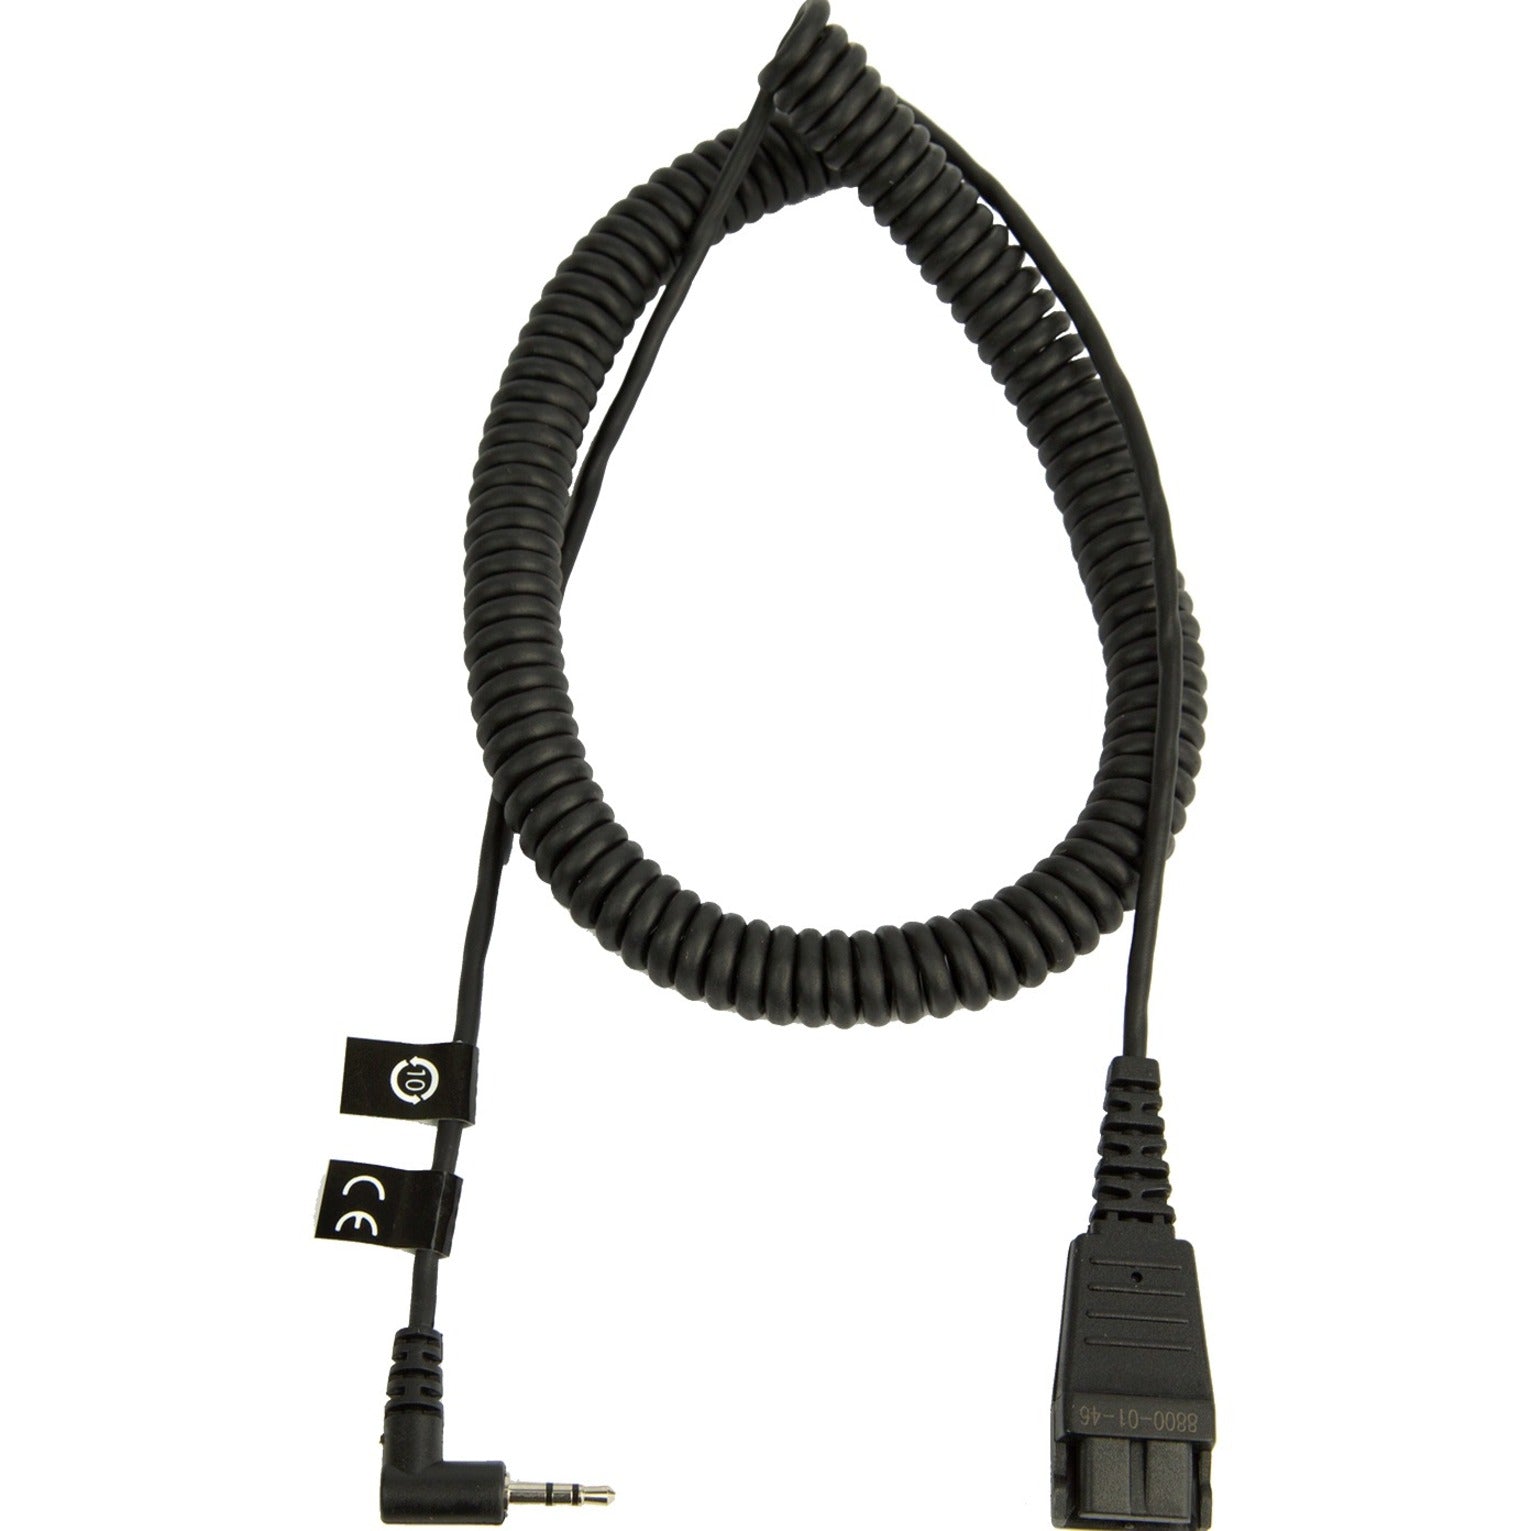 Jabra 8800-01-46 Headset Cable, Coiled Audio Cable, 6.56 ft, Quick Disconnect/Sub-mini phone